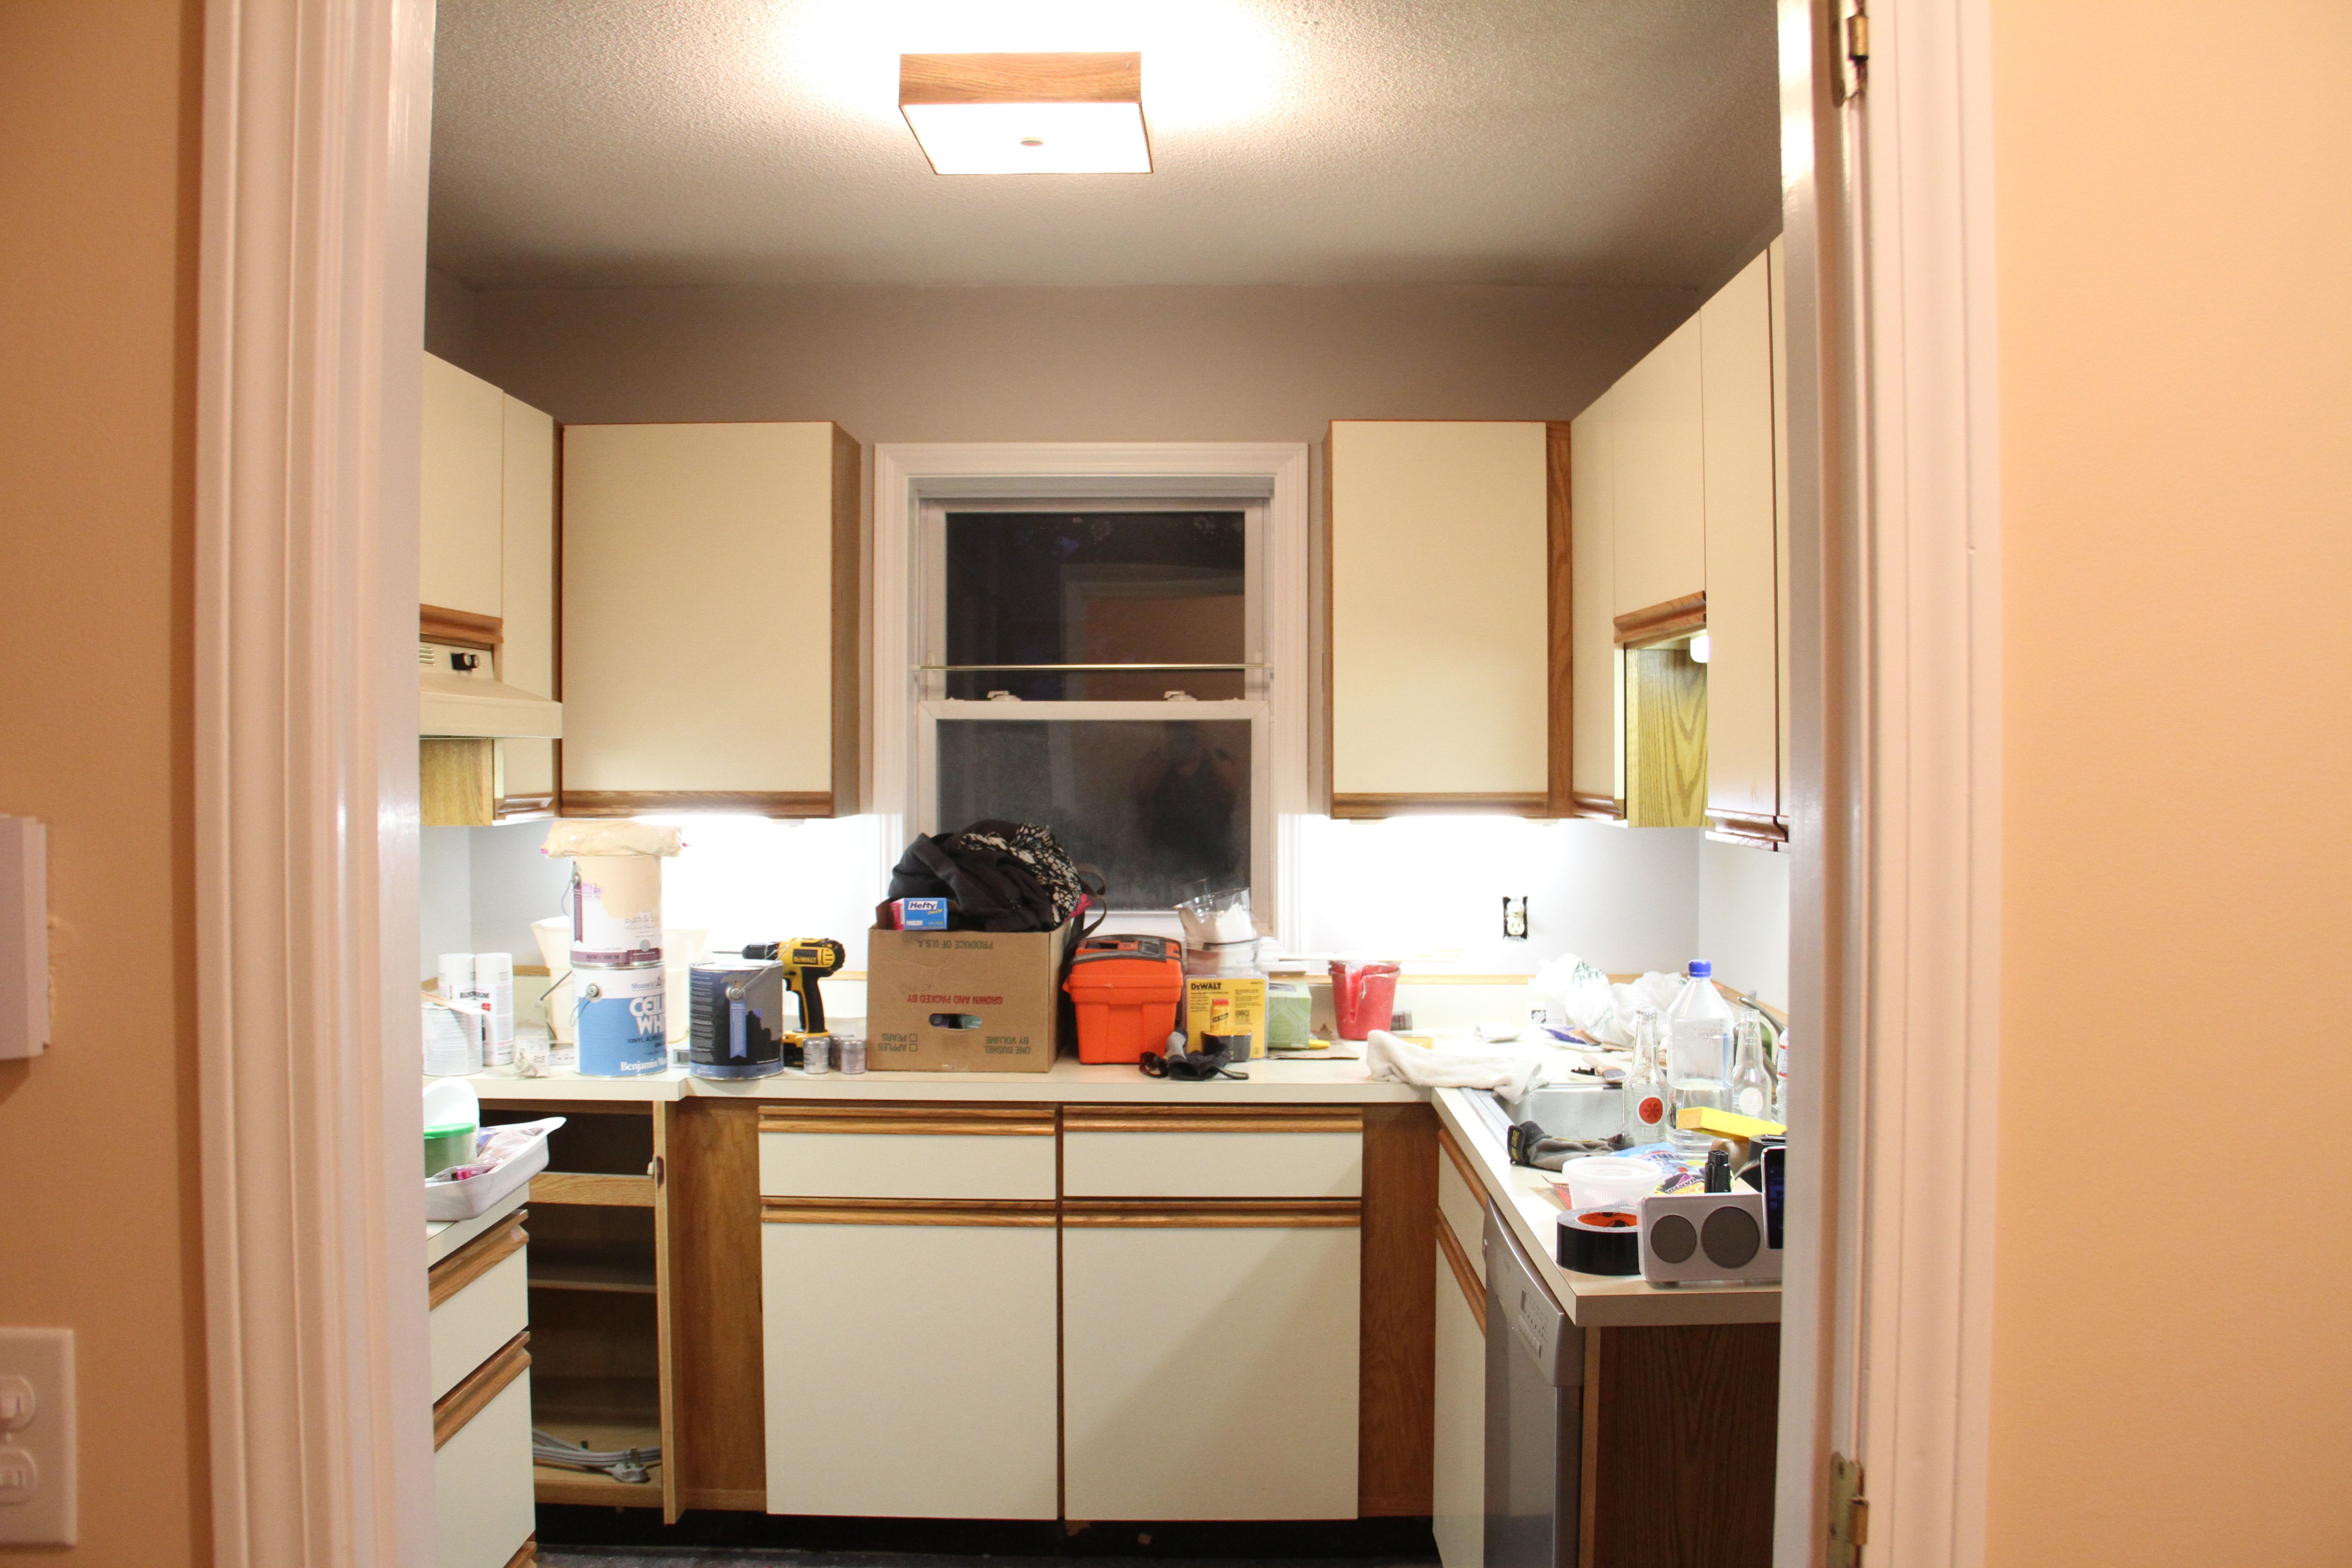 BAM! Just look at what a difference the undercabinet lighting makes!